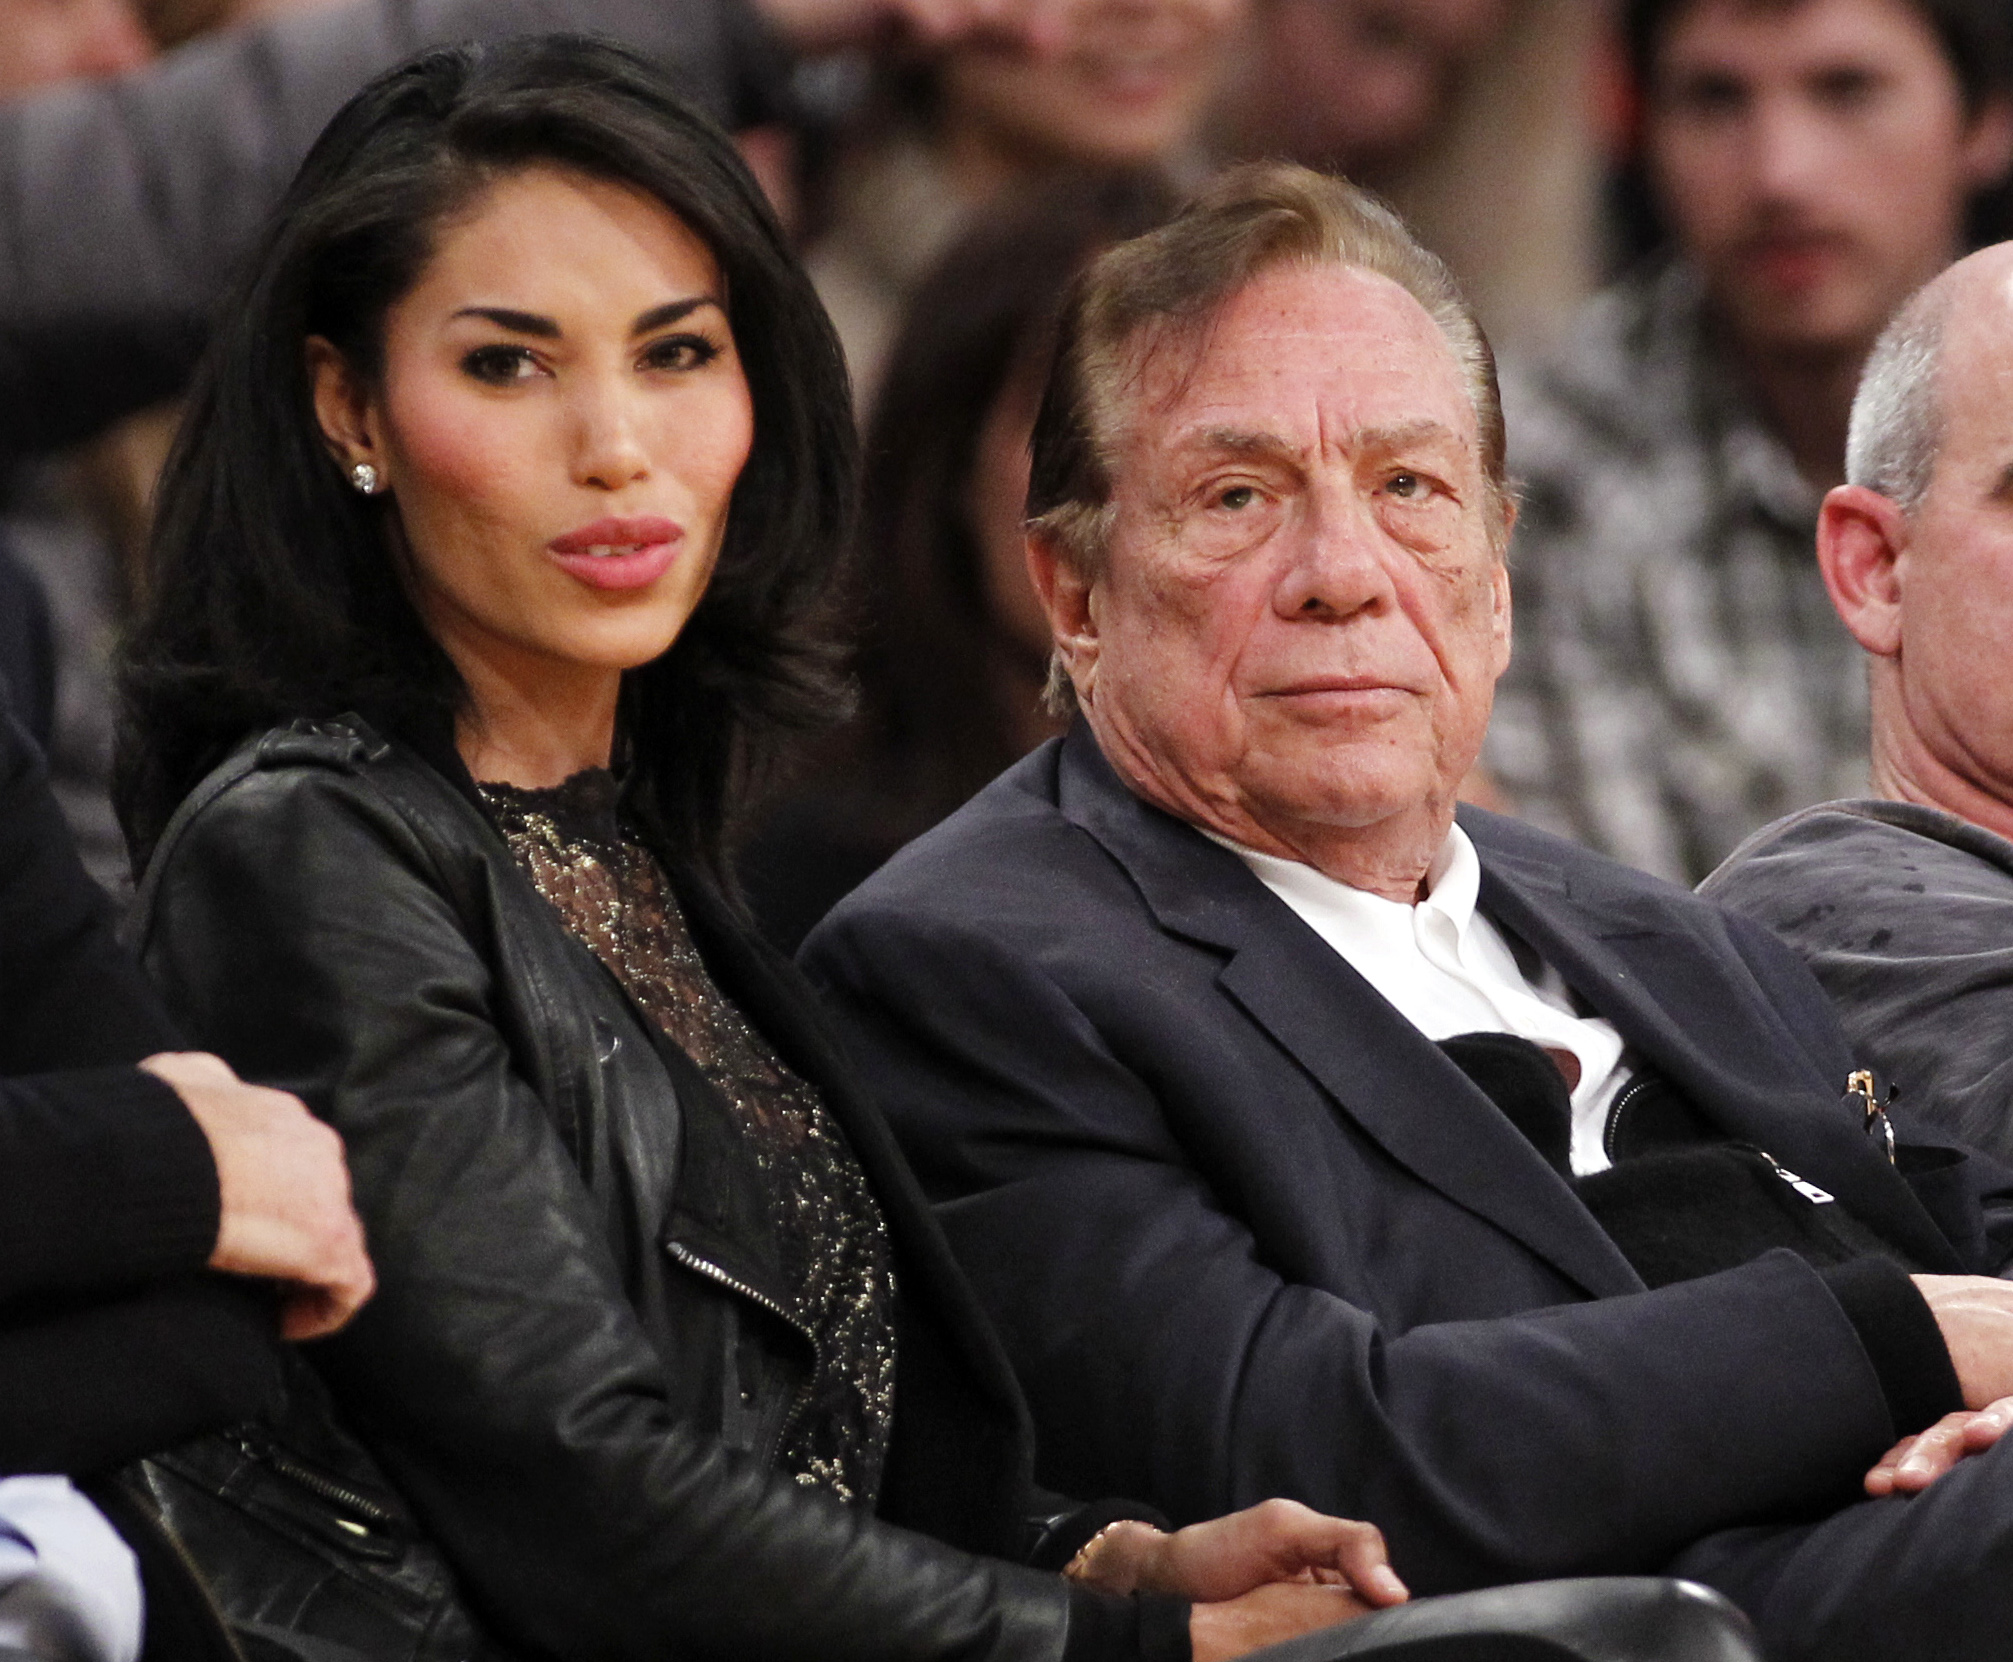 PHOTO: In this Dec. 19, 2010, file photo, Los Angeles Clippers owner Donald Sterling, third right, sits with V. Stiviano, left, as  they watch the Clippers play a game in Los Angeles. 